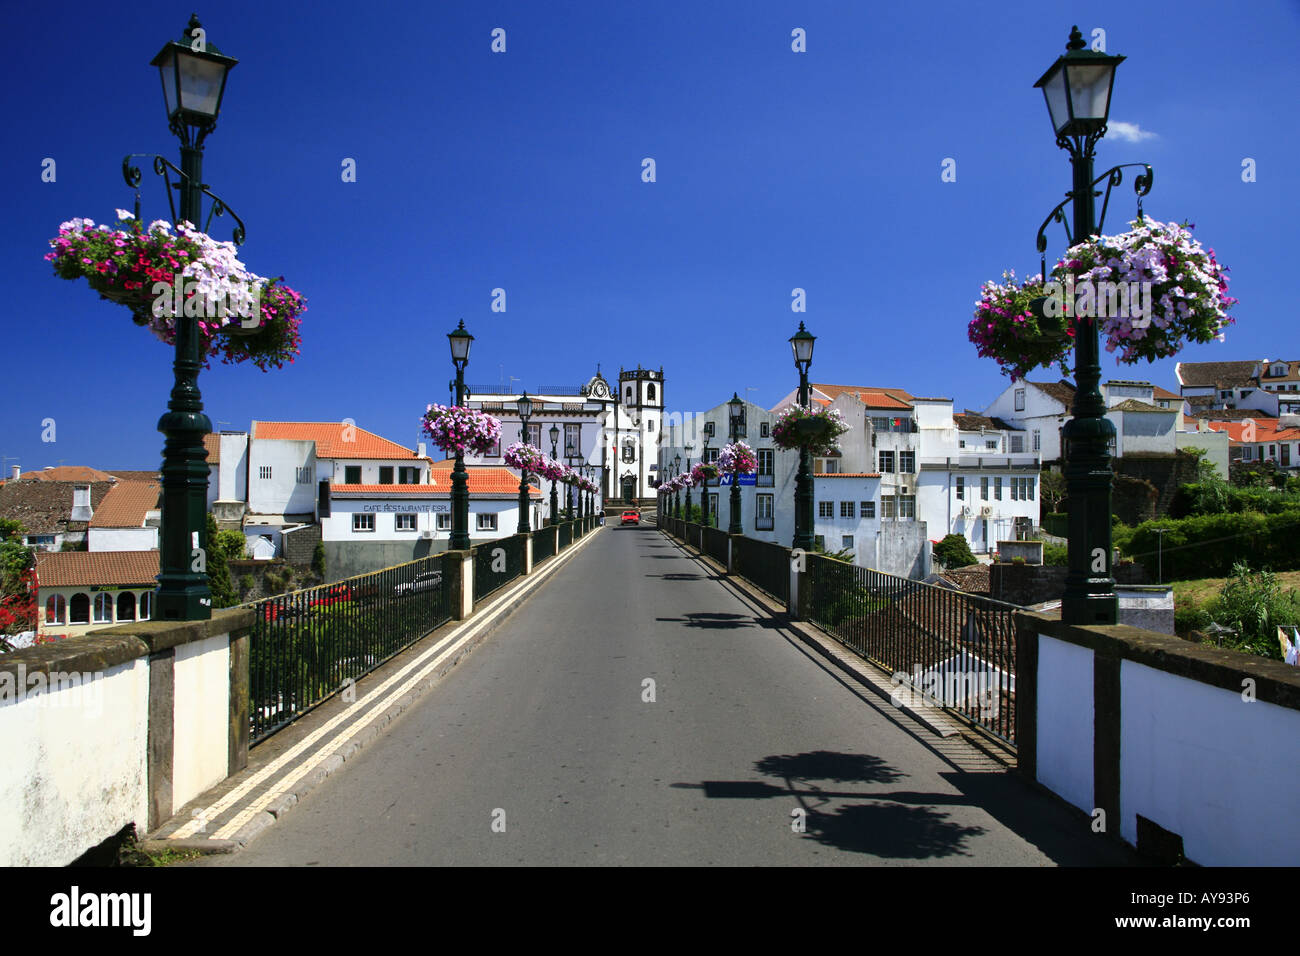 The town of Nordeste. Sao Miguel island, Azores islands, Portugal. Stock Photo